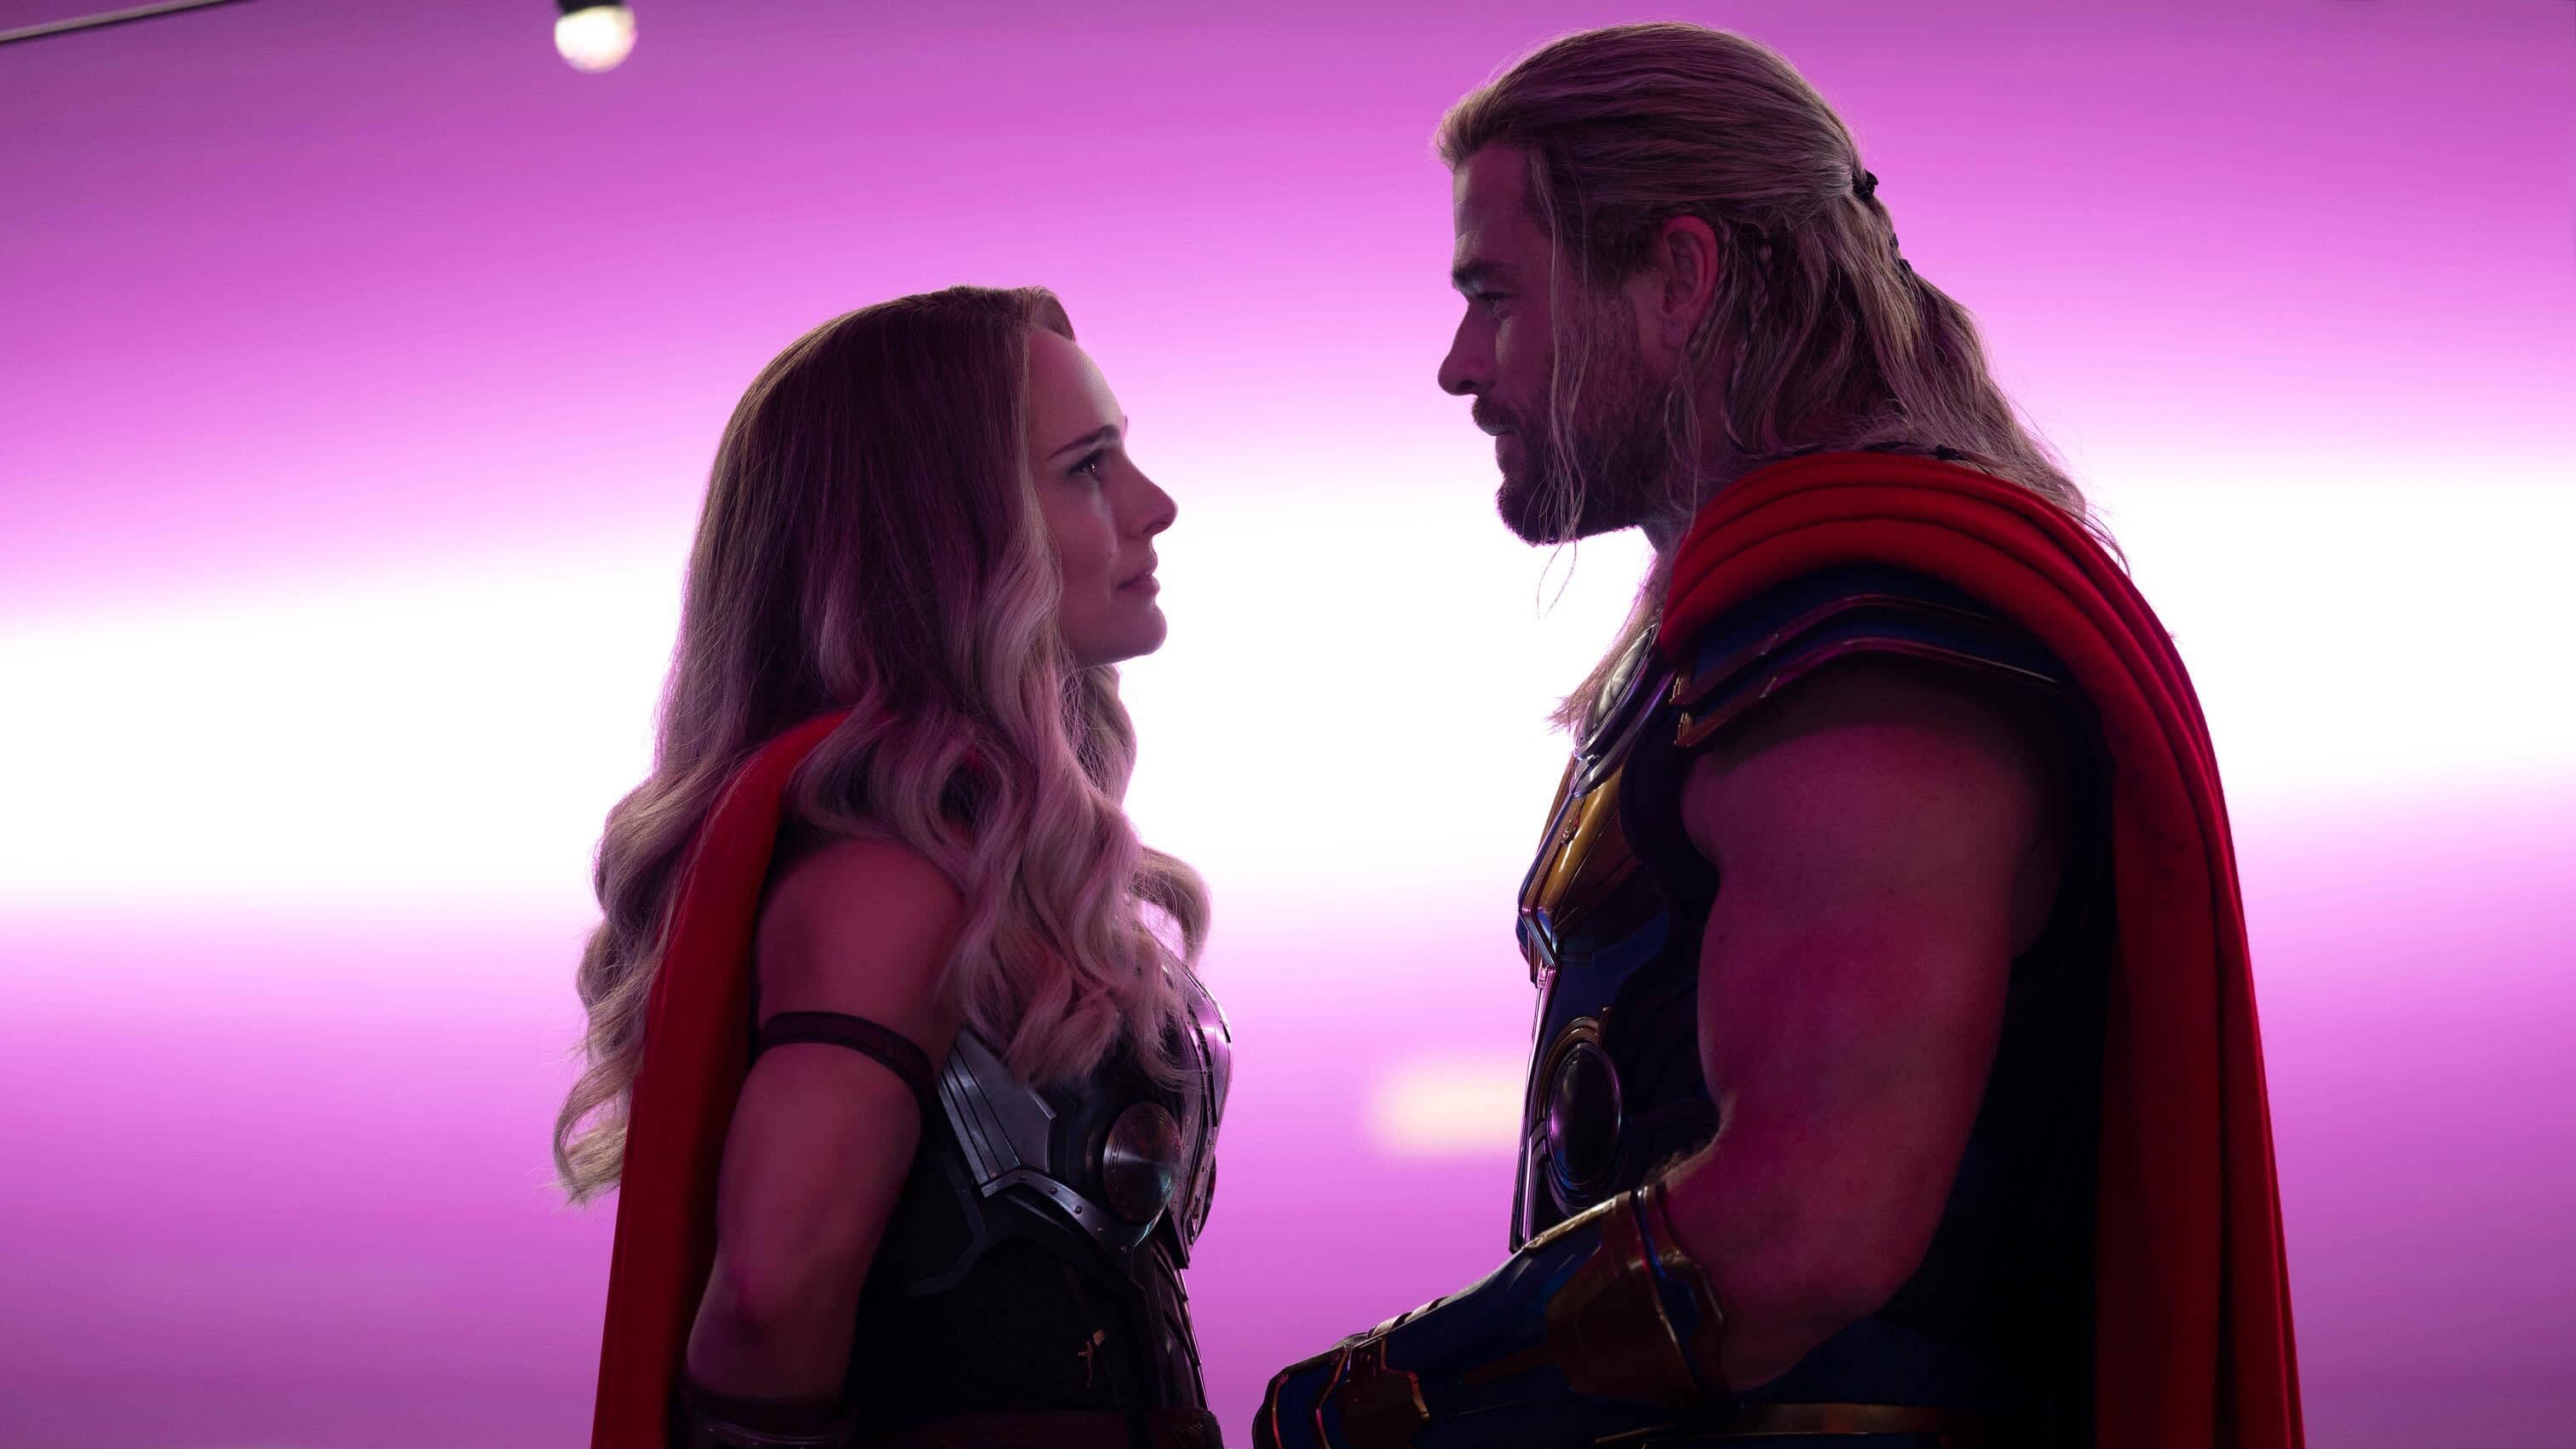 Thor: Love and Thunder Is an MCU Hit. Where Does Summer Box Office Go?